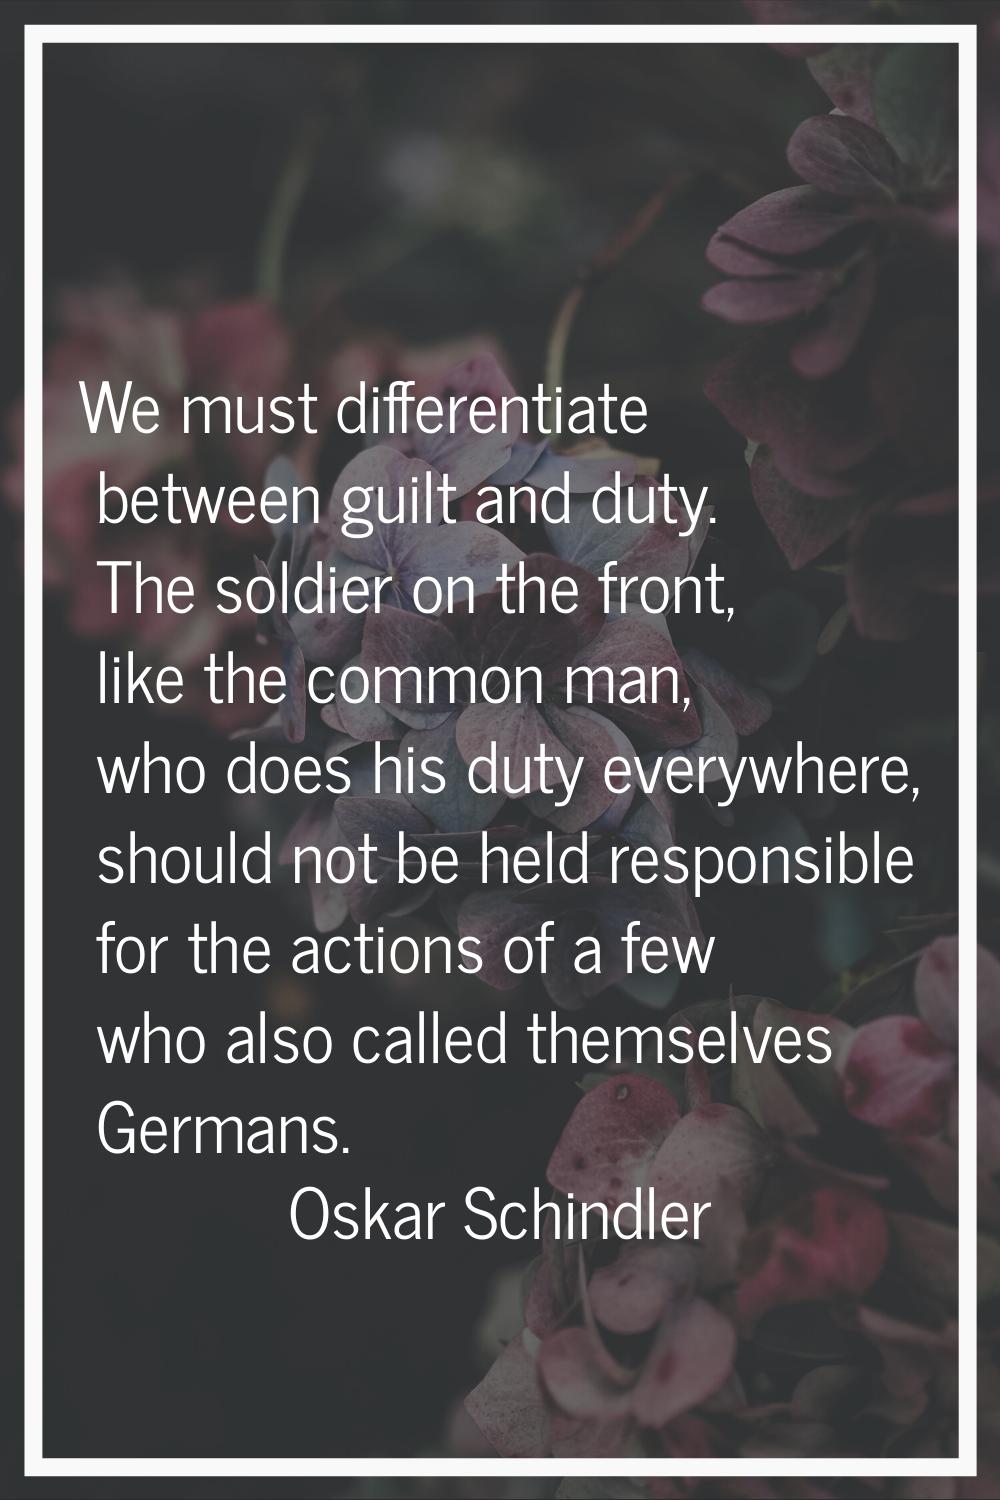 We must differentiate between guilt and duty. The soldier on the front, like the common man, who do